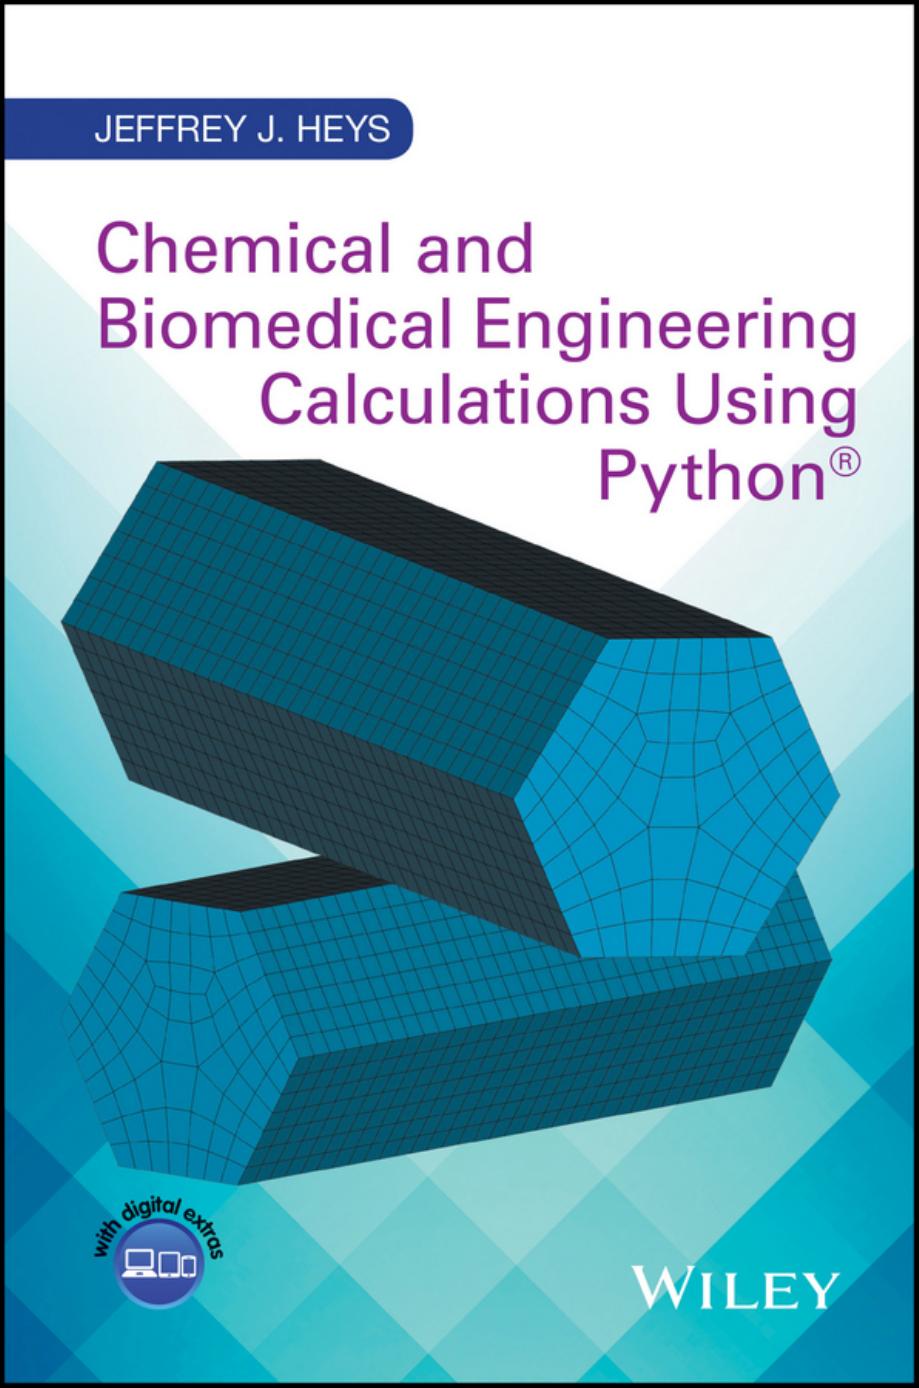 Chemical and Biomedical Engineering Calculations Using Pythonâ by Jeffrey J Heys